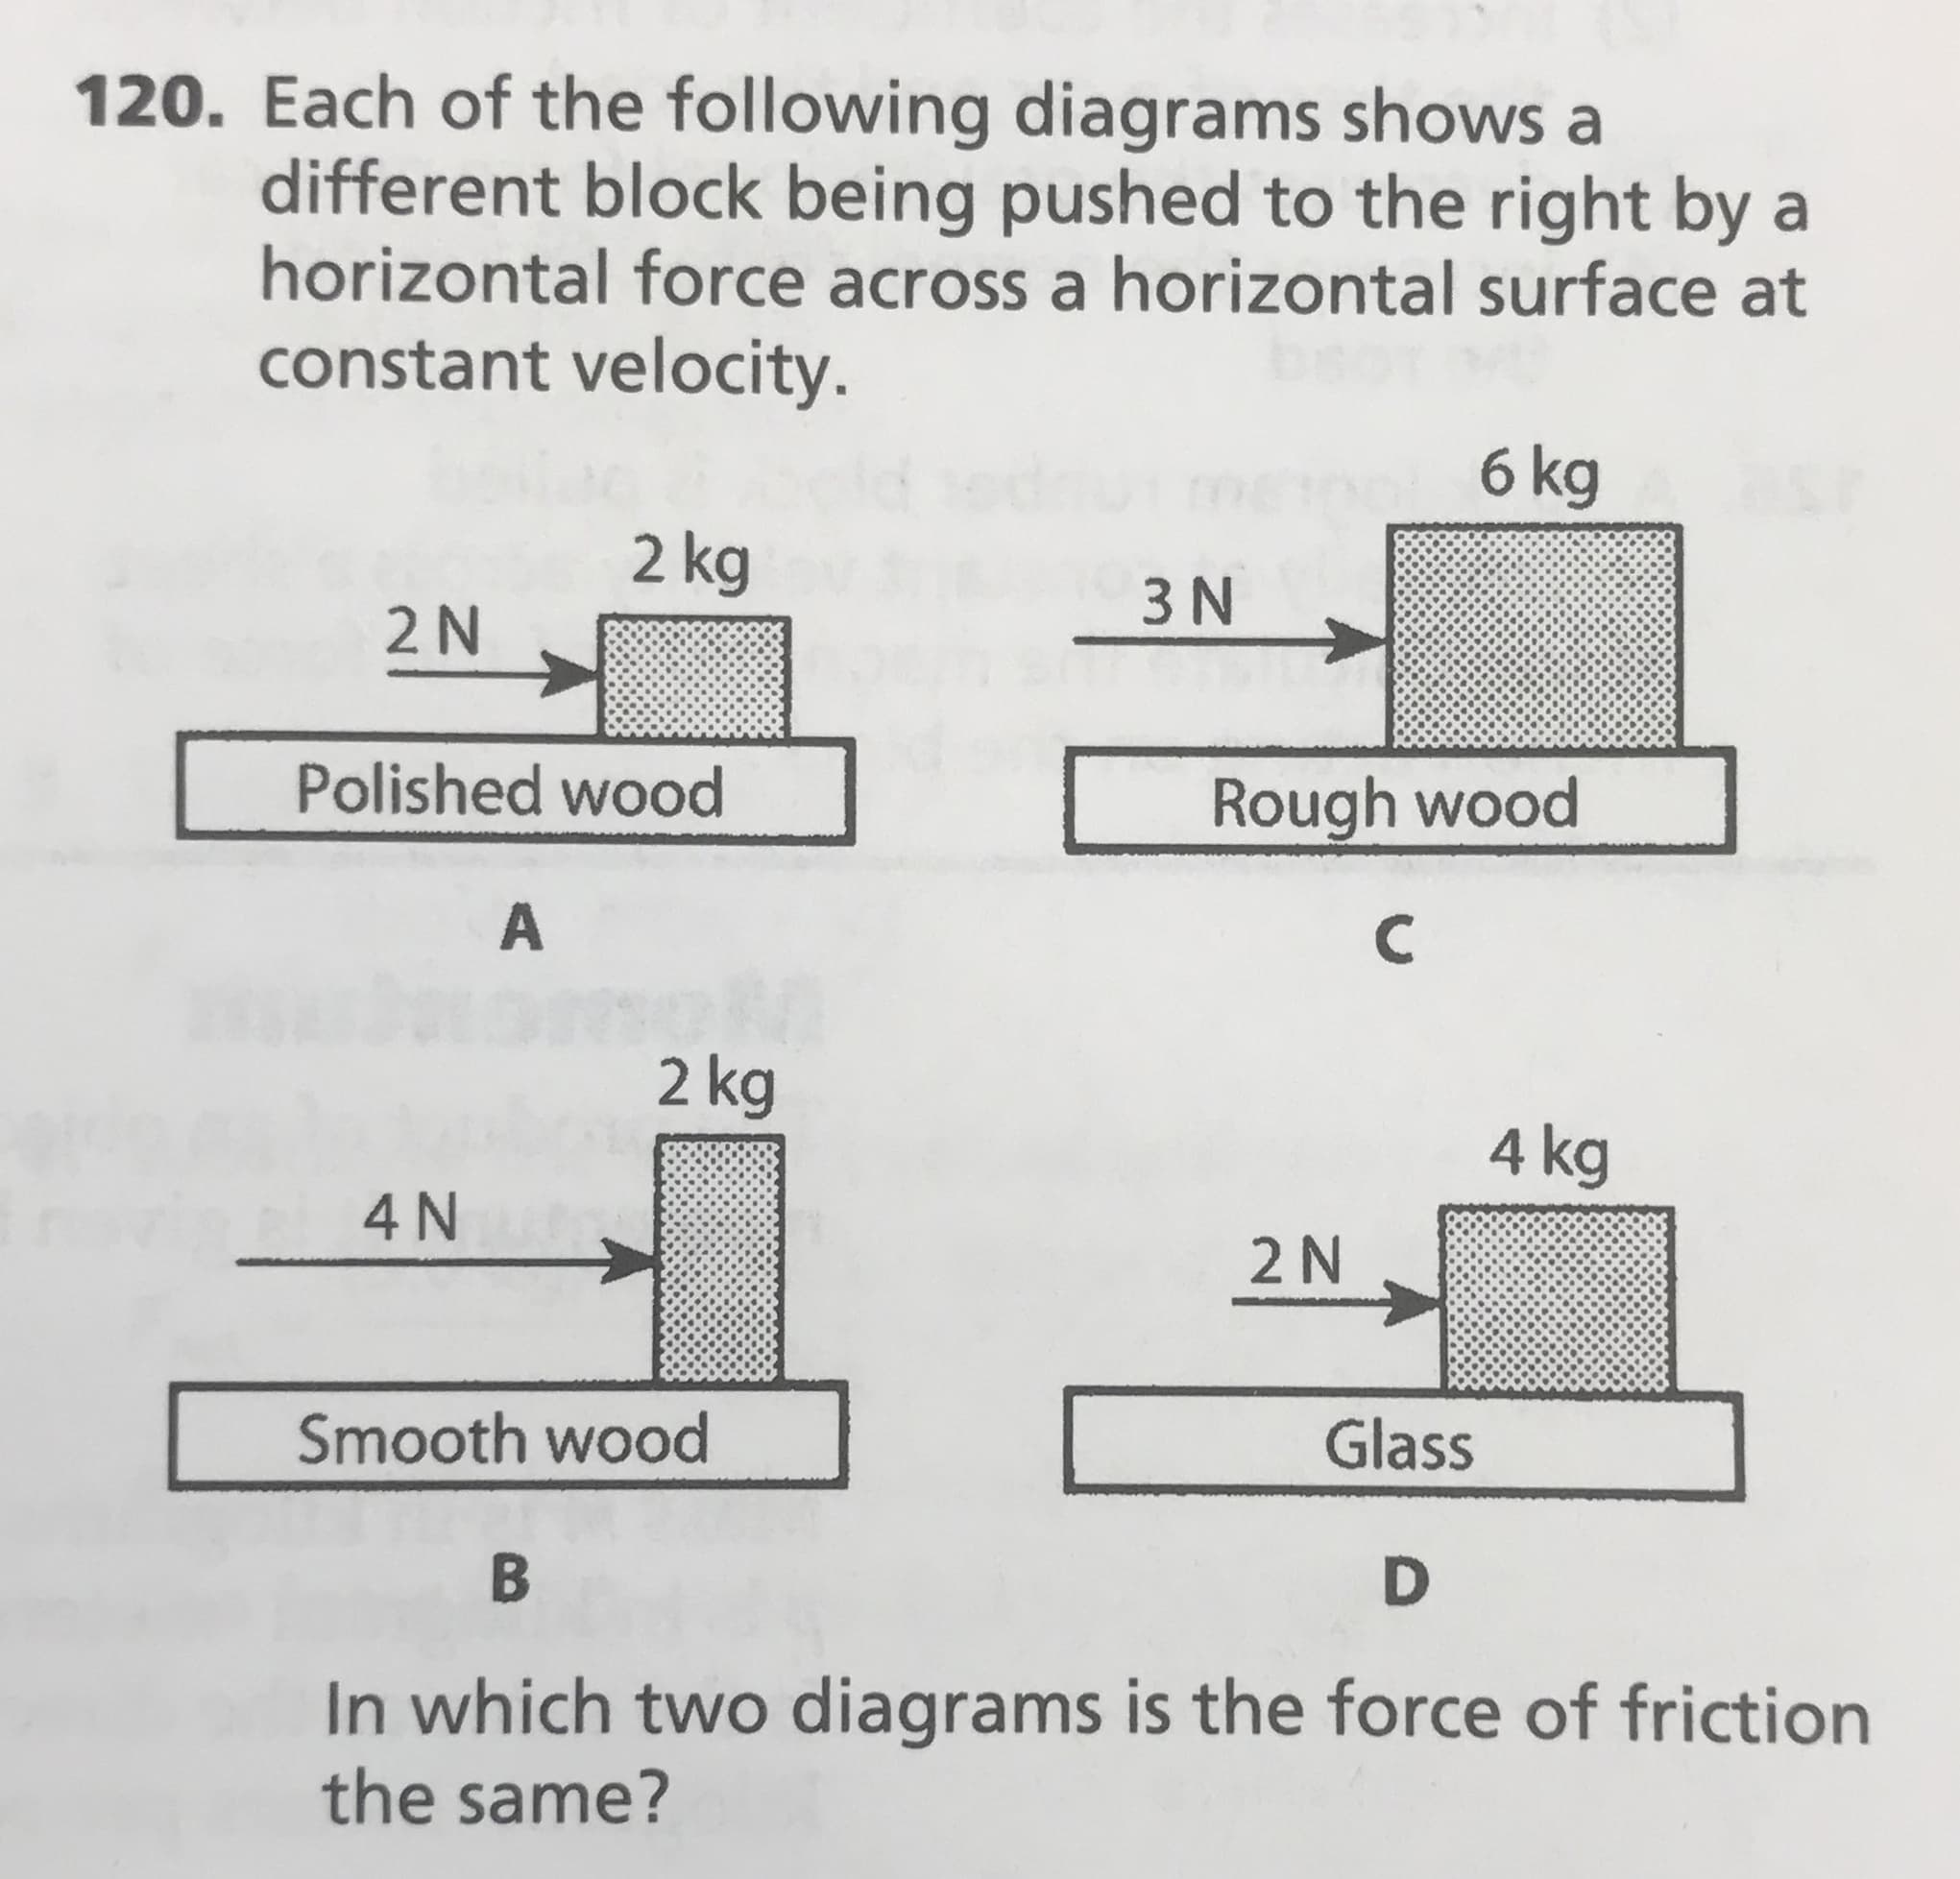 120. Each of the following diagrams shows a
different block being pushed to the right by a
horizontal force across a horizontal surface at
constant velocity.
bsor
6 kg
2 kg
3 N
2N
Polished wood
Rough wood
C
2 kg
4 kg
4N
2 N
Smooth wood
Glass
В
D
In which two diagrams is the force of friction
the same?
